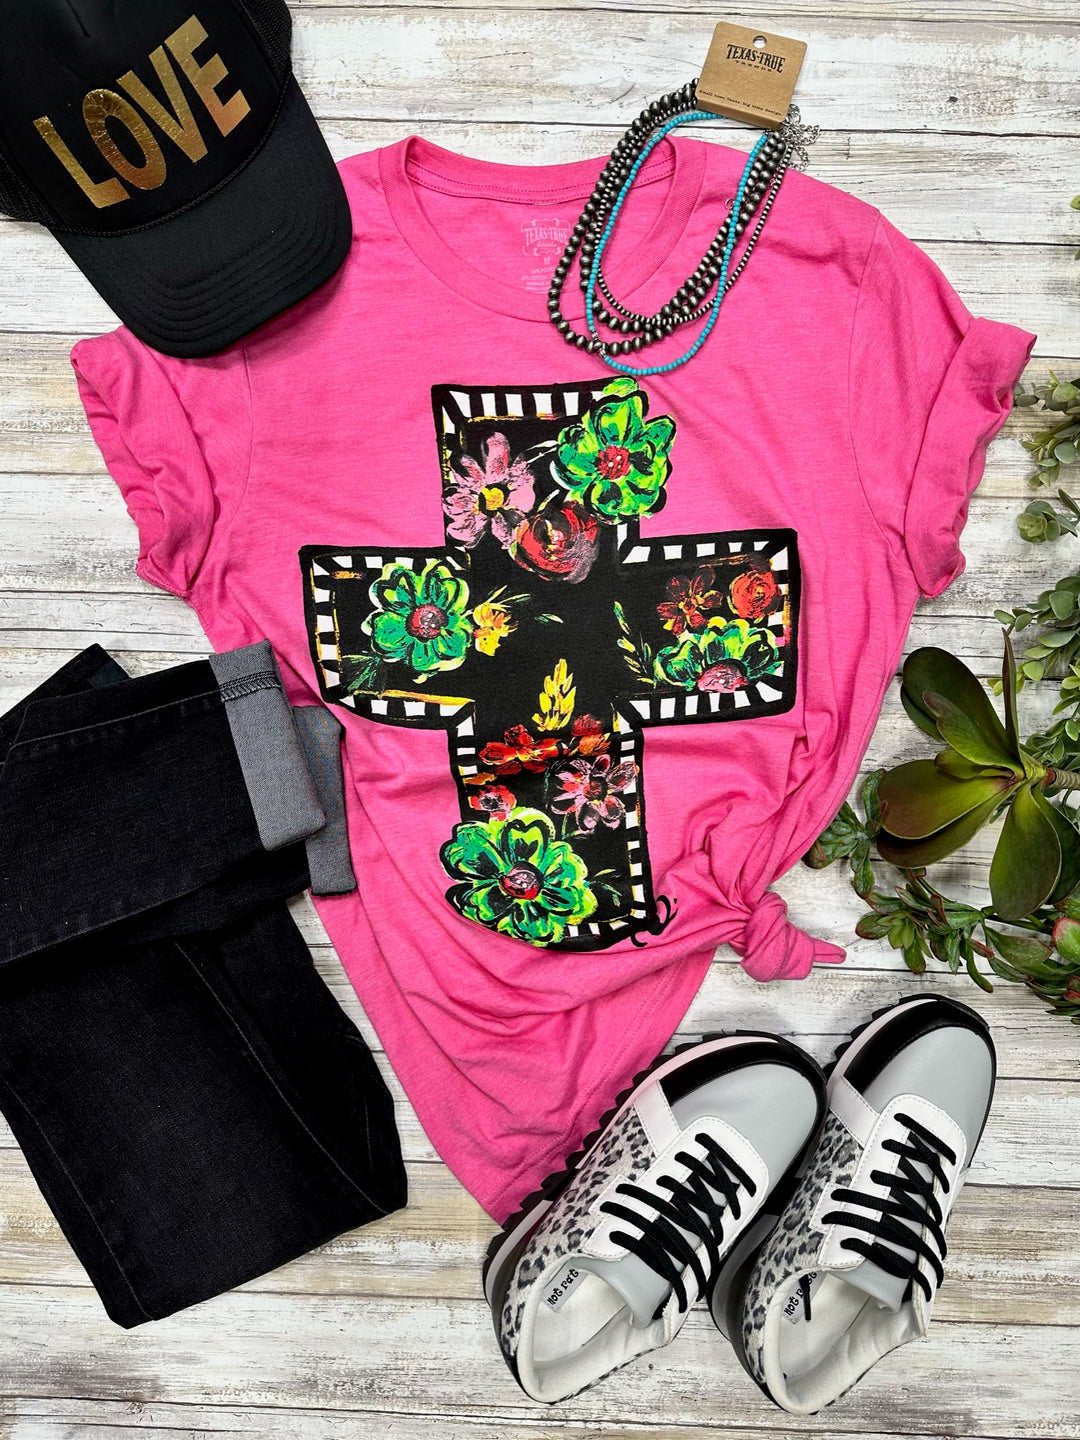 Pink Callie's Floral Cross Tee by Texas True Threads